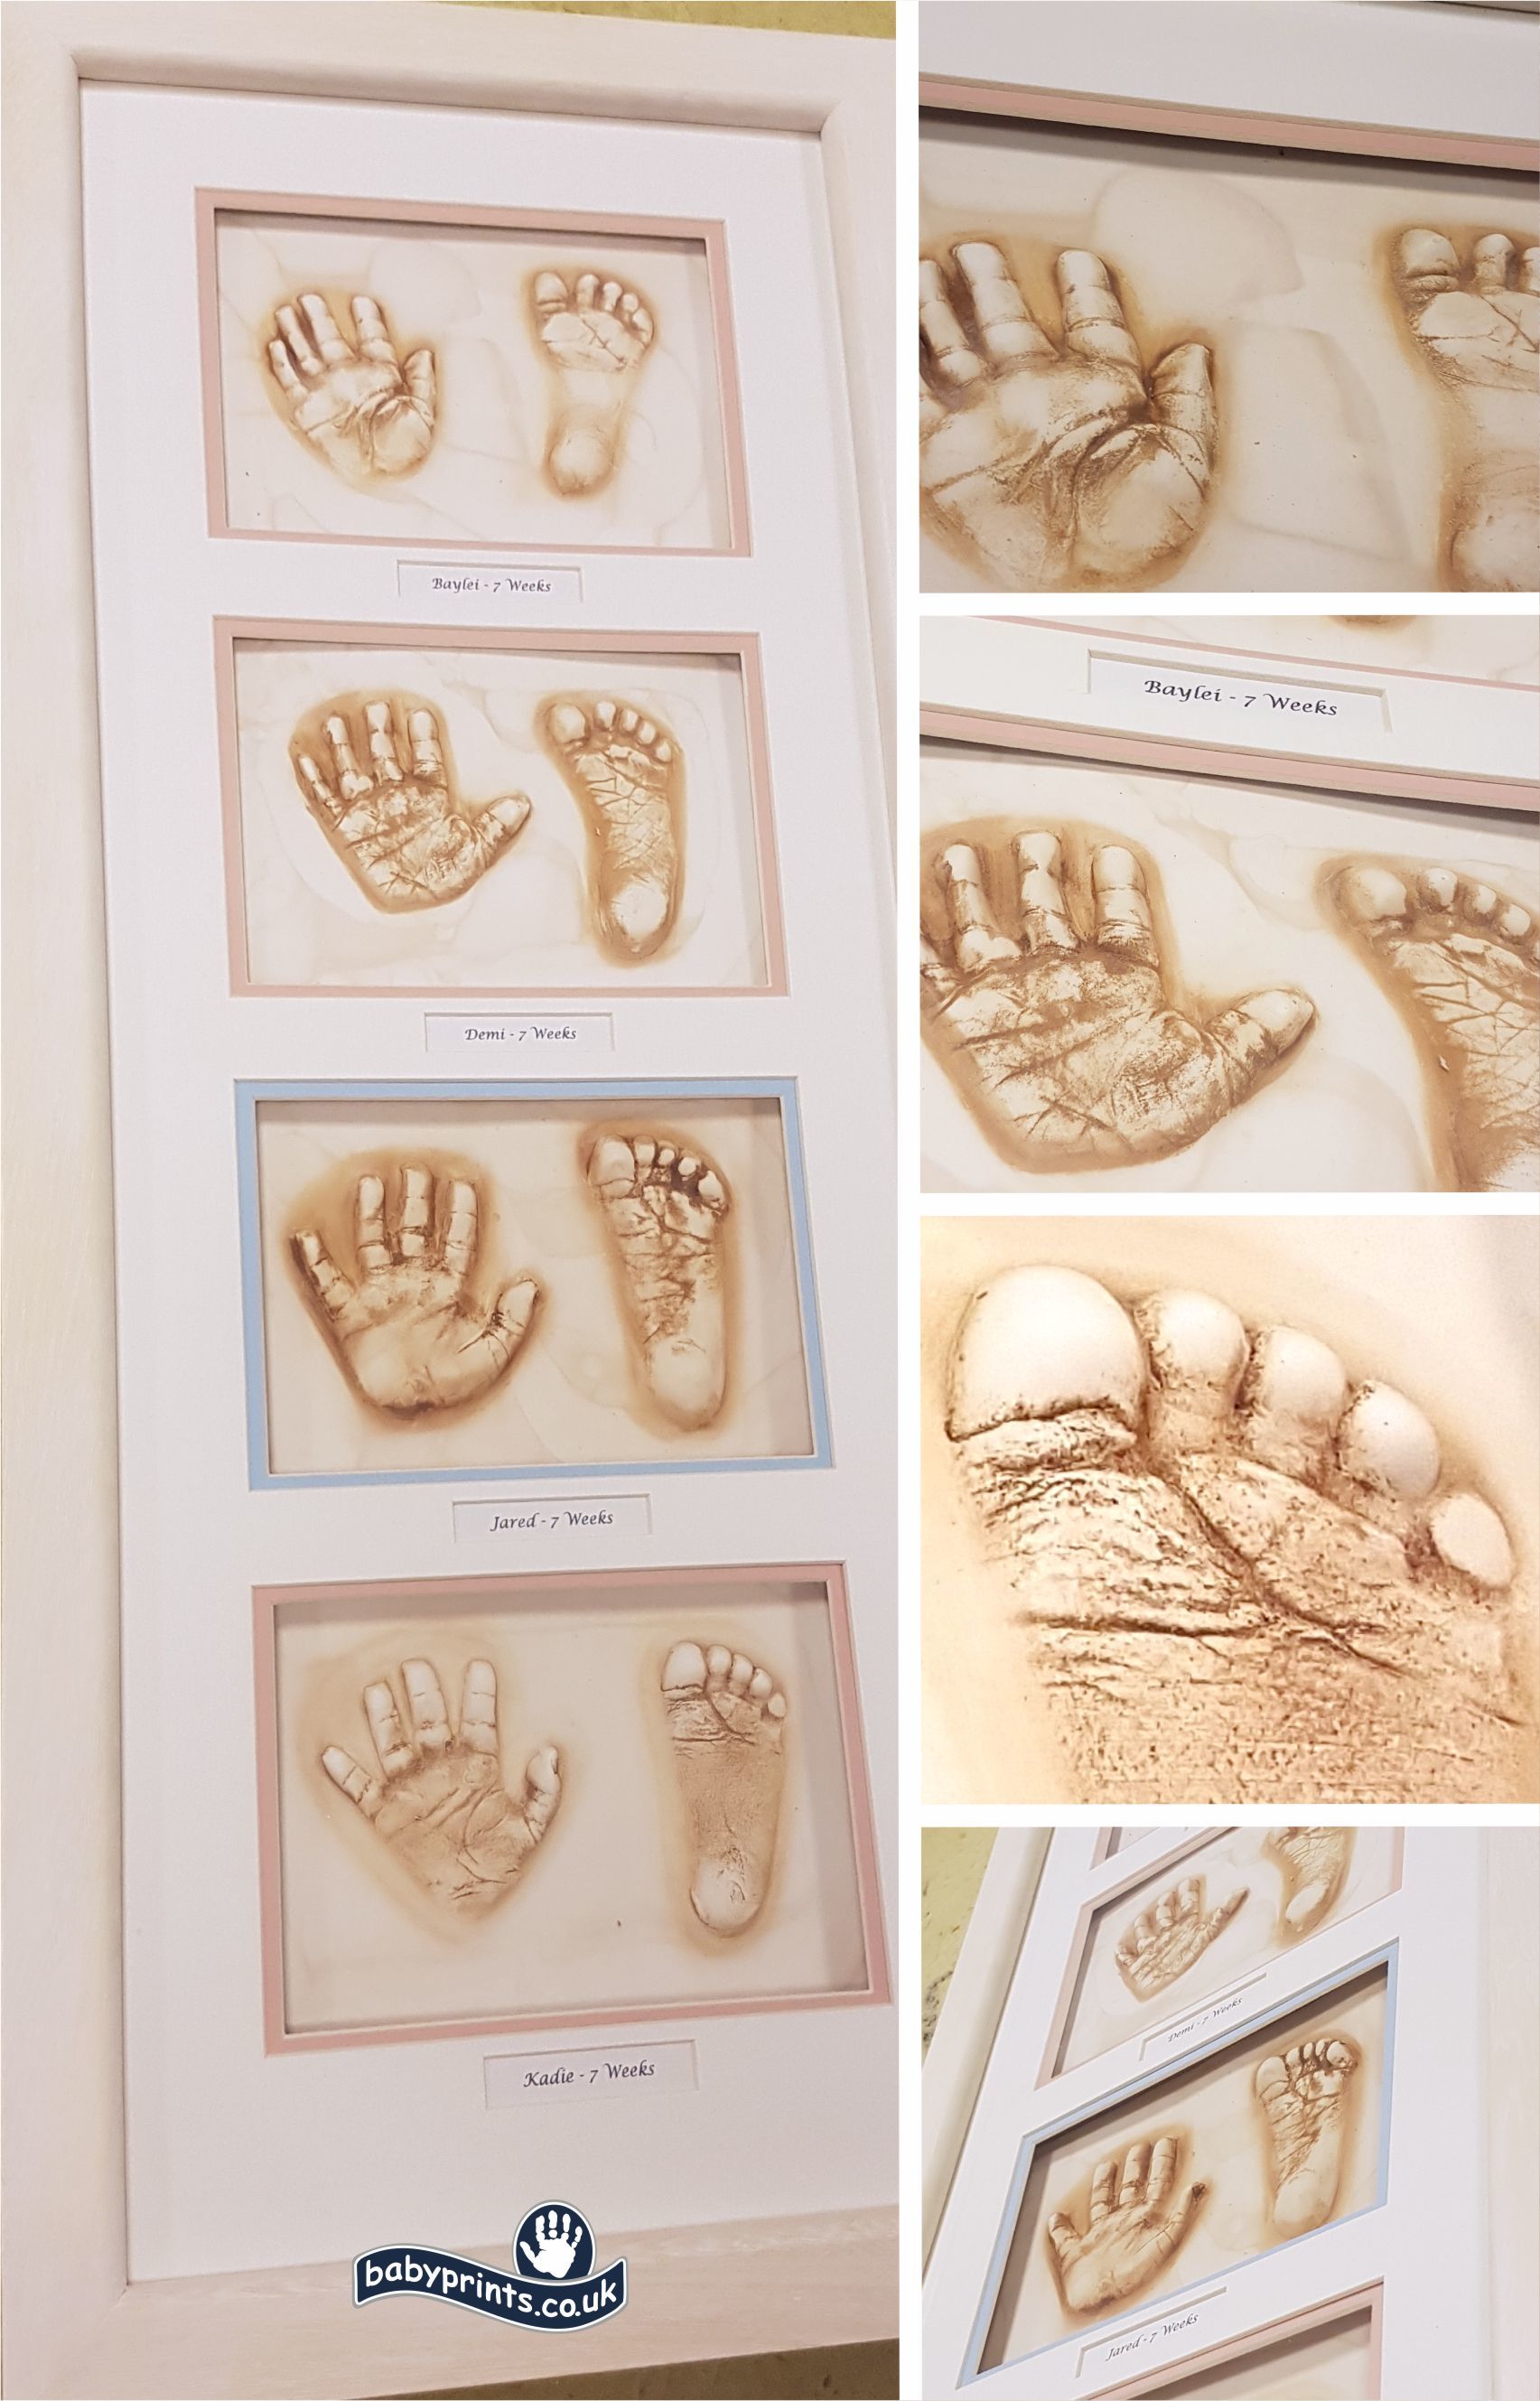 Four sibling hand and foot imprints at same age